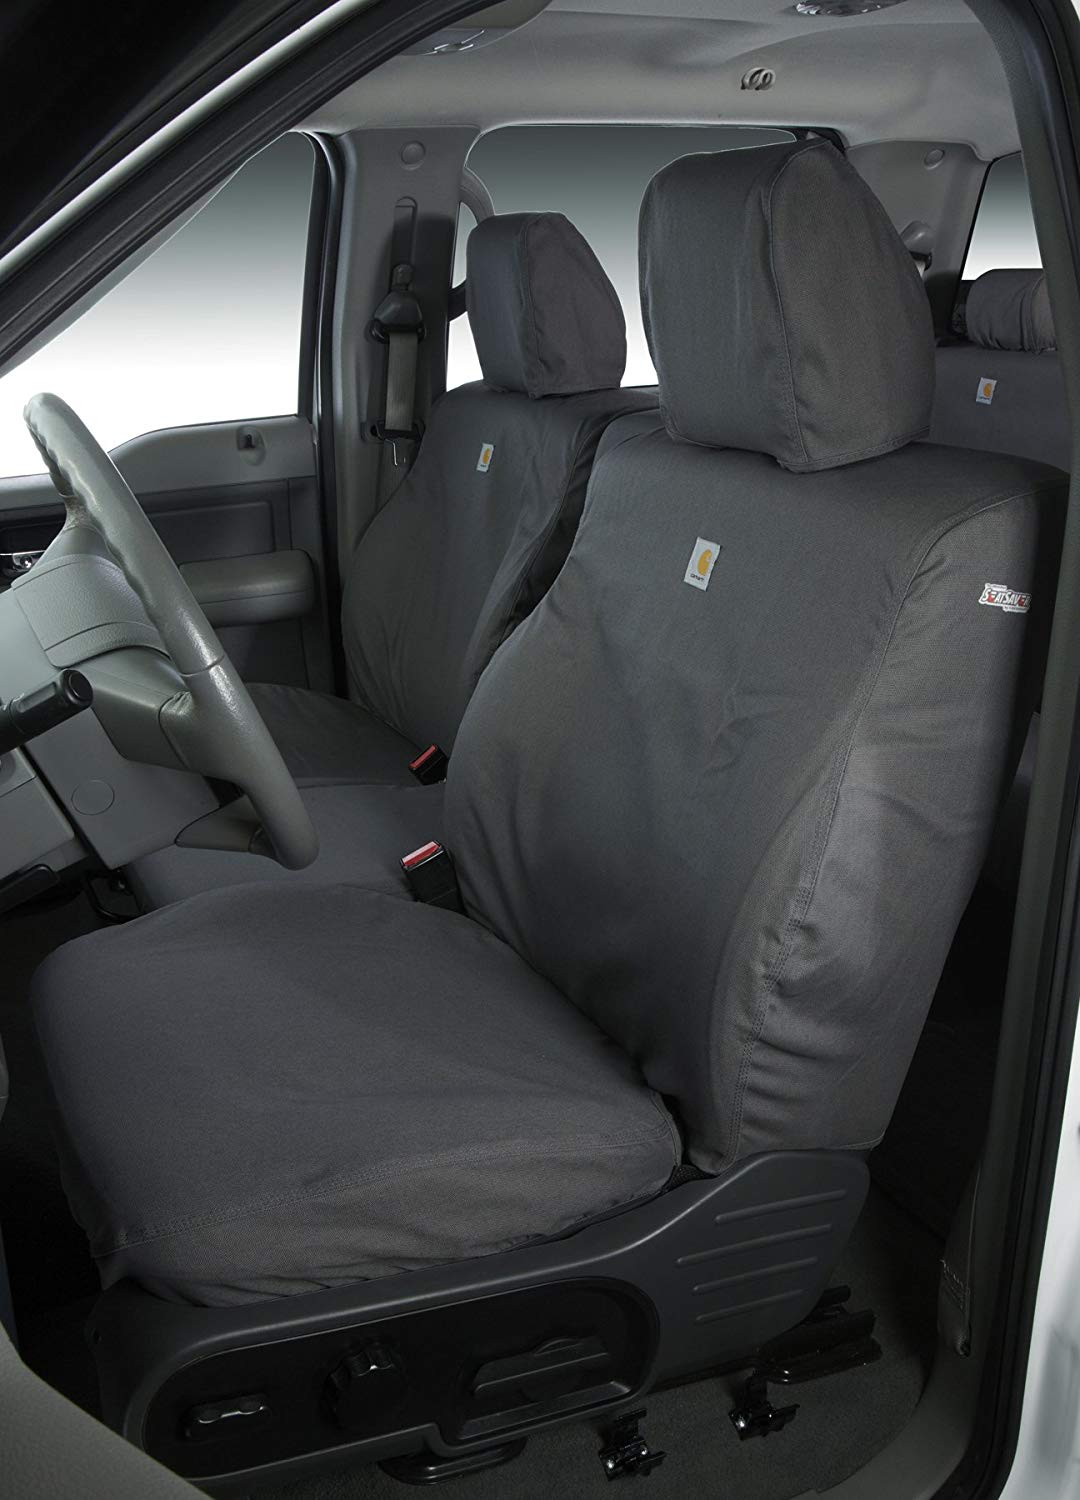 Seat Covers - Three Rivers Glass & Accessories - San Angelo, Texas